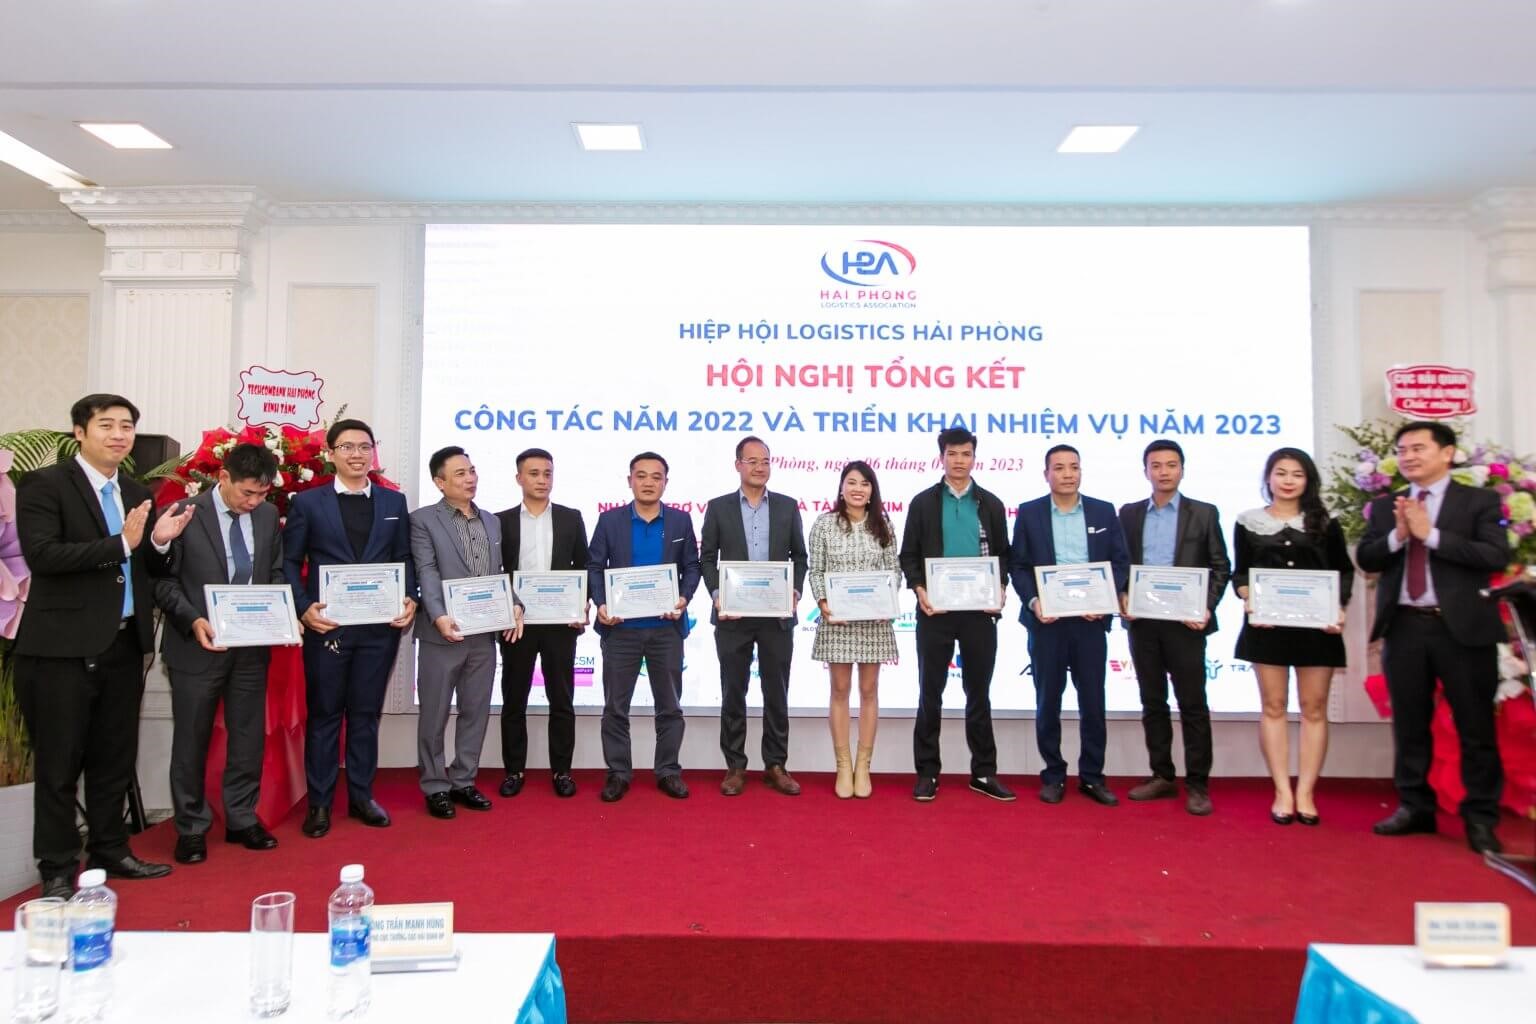 ASHICO LOGISTICS PARTICIPATES IN THE CONFERENCE OF WORKING SUMMARY OF 2022 AND IMPLEMENTATION OF TASK IN 2023 HAI PHONG LOGISTICS ASSOCIATION